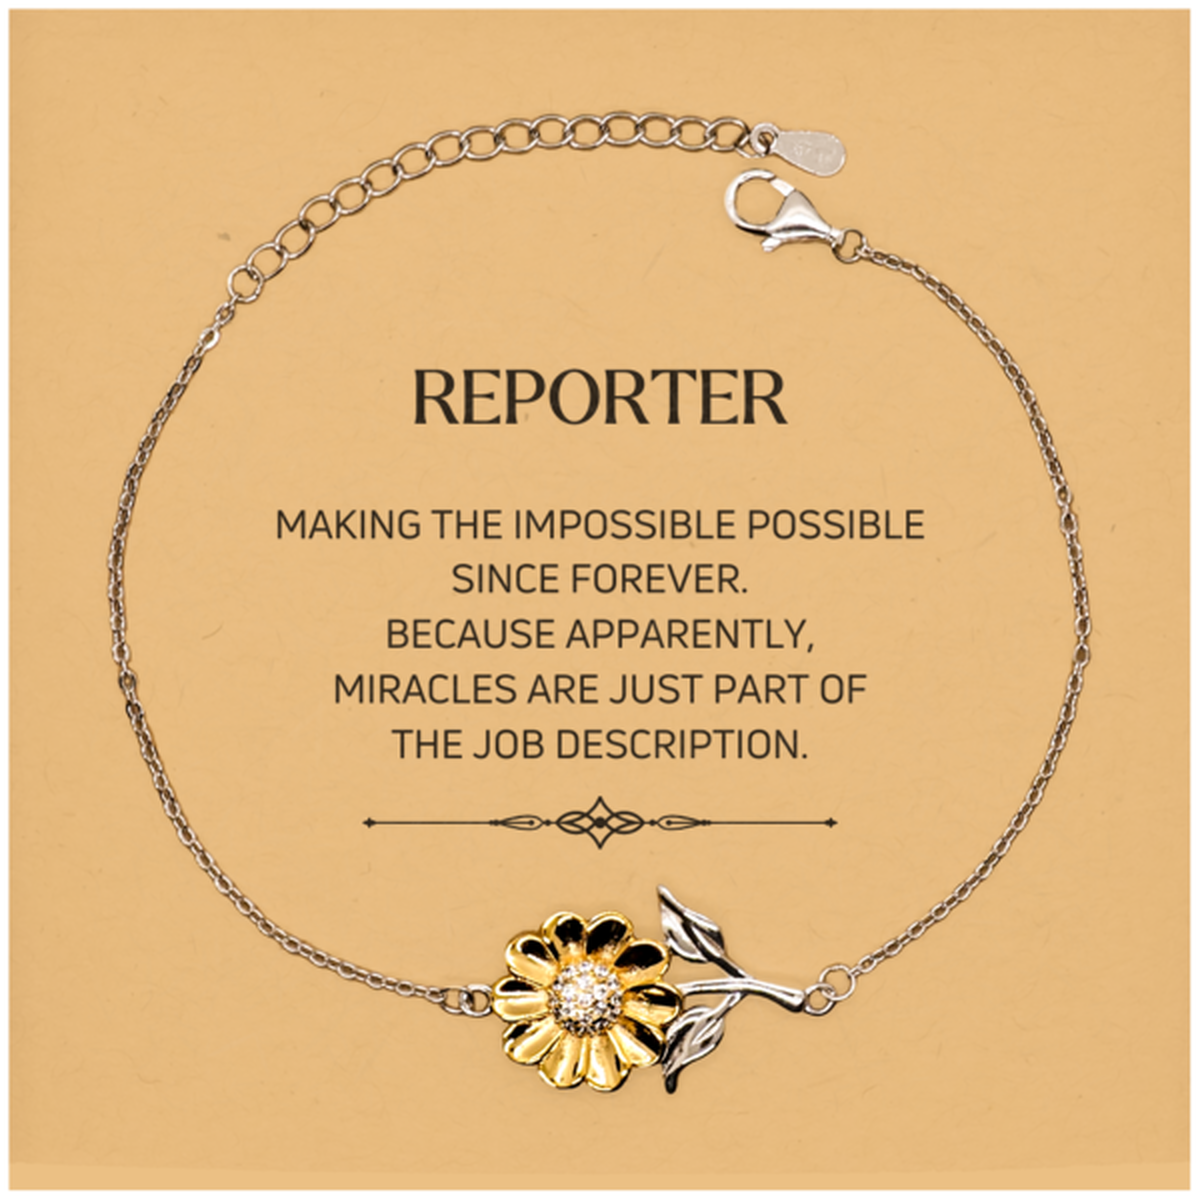 Funny Reporter Gifts, Miracles are just part of the job description, Inspirational Birthday Christmas Sunflower Bracelet For Reporter, Men, Women, Coworkers, Friends, Boss